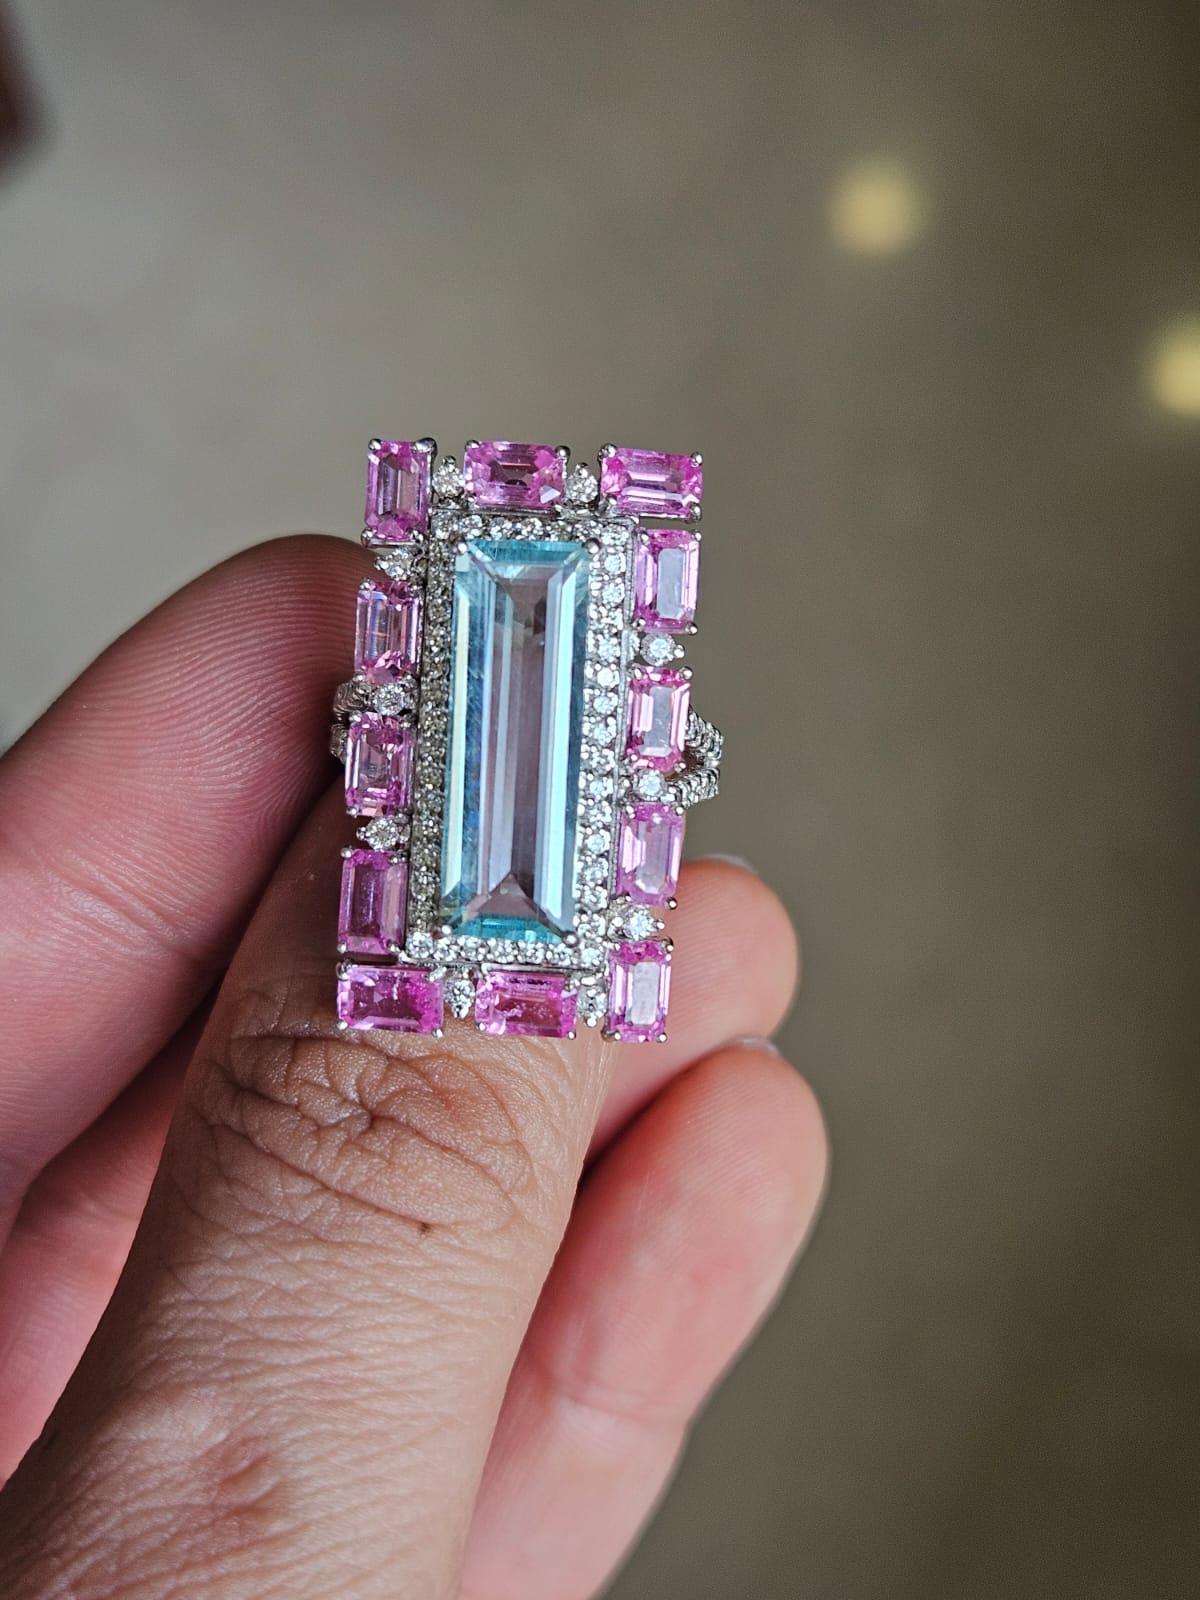 A very gorgeous and beautiful, modern style, Aquamarine & Pink Sapphire Cocktail Ring set in 18K White Gold & natural Diamonds. The weight of the Aquamarine is 4.33 carats. The weight of the Pink Sapphires is 3.86 carats. The Pink Sapphires are of